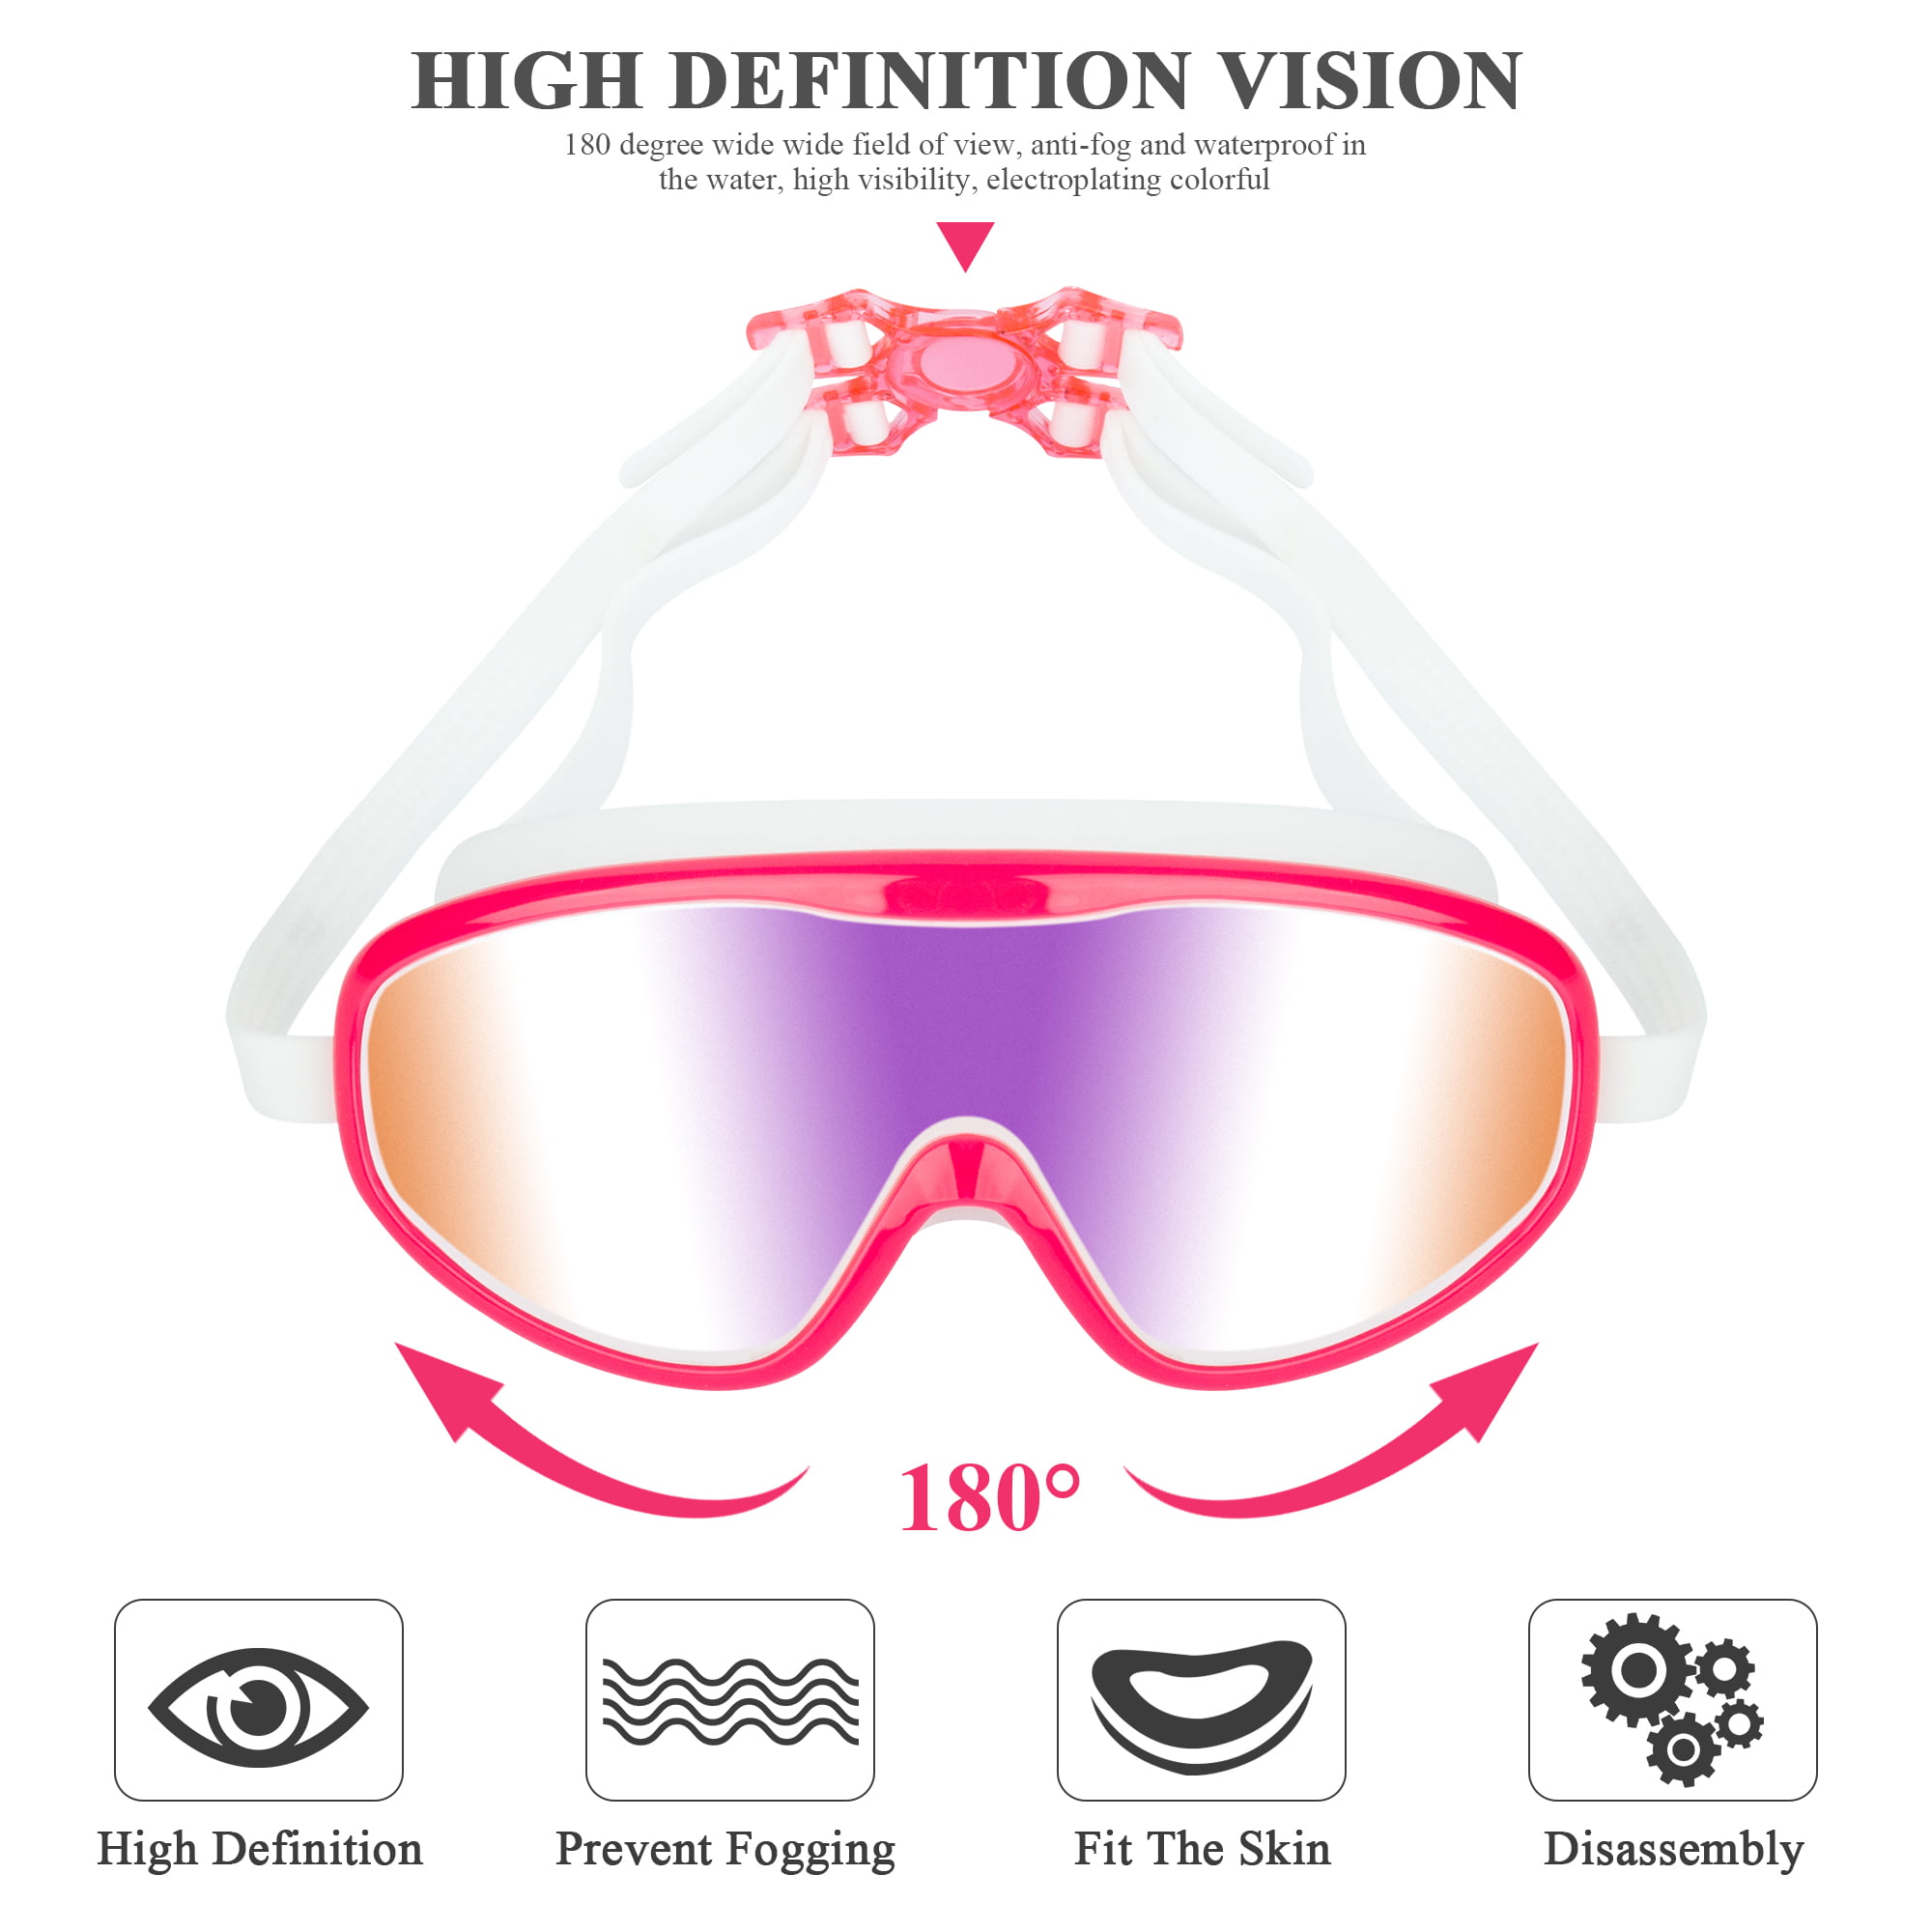 Waterproof with Anti-Fog Protection Lenses Elimoons 2-PACK Kids Swimming Goggles Junior Children Girls Boys Early Teens Age 3-15 